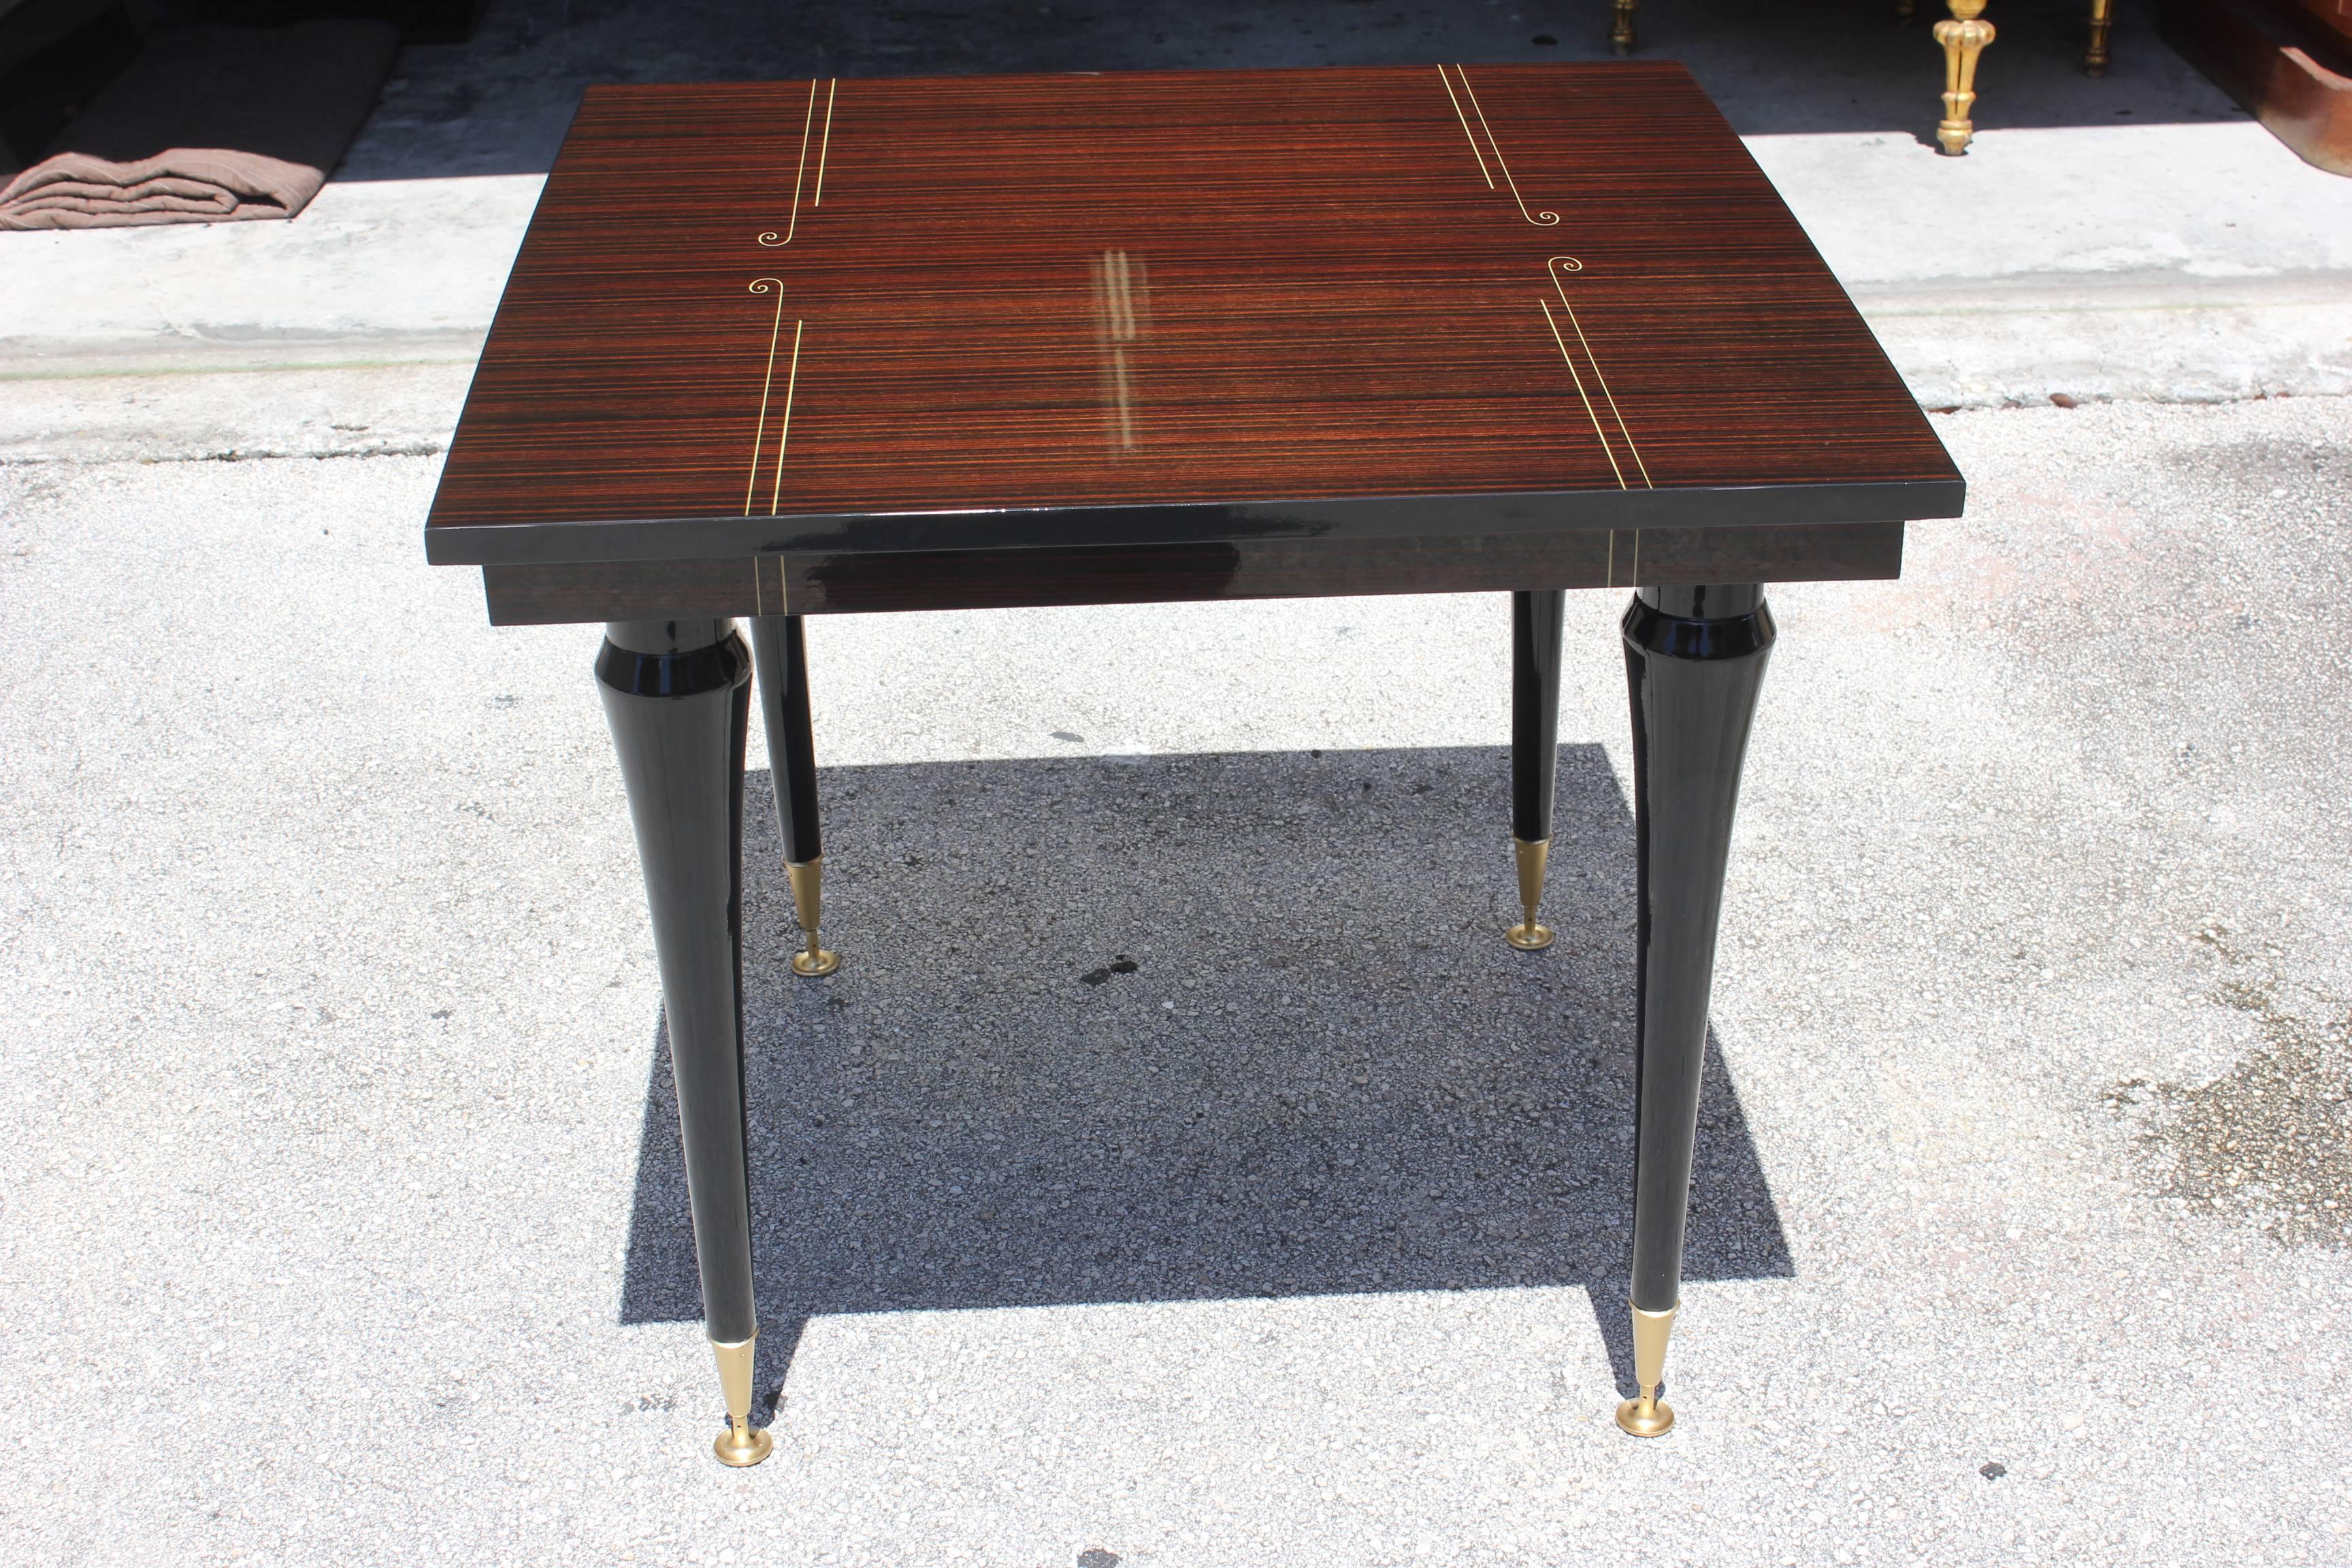 A detailed French Art Deco exotic Macassar ebony square center or Foyer table, circa 1940s. Stunning top and black lacquer legs.